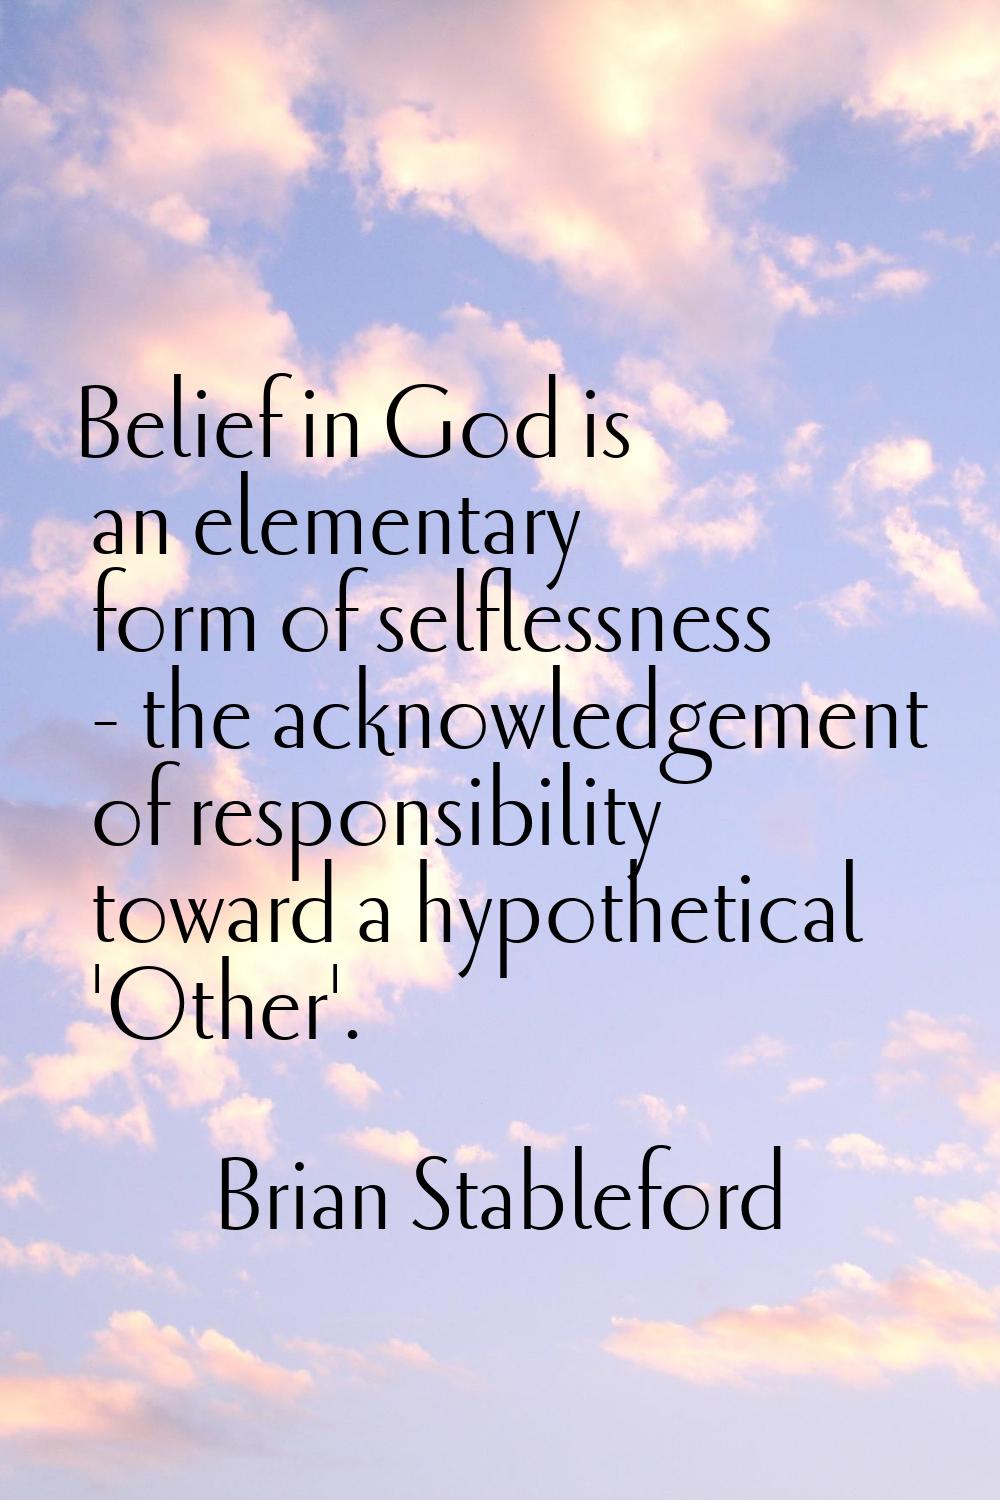 Belief in God is an elementary form of selflessness - the acknowledgement of responsibility toward 